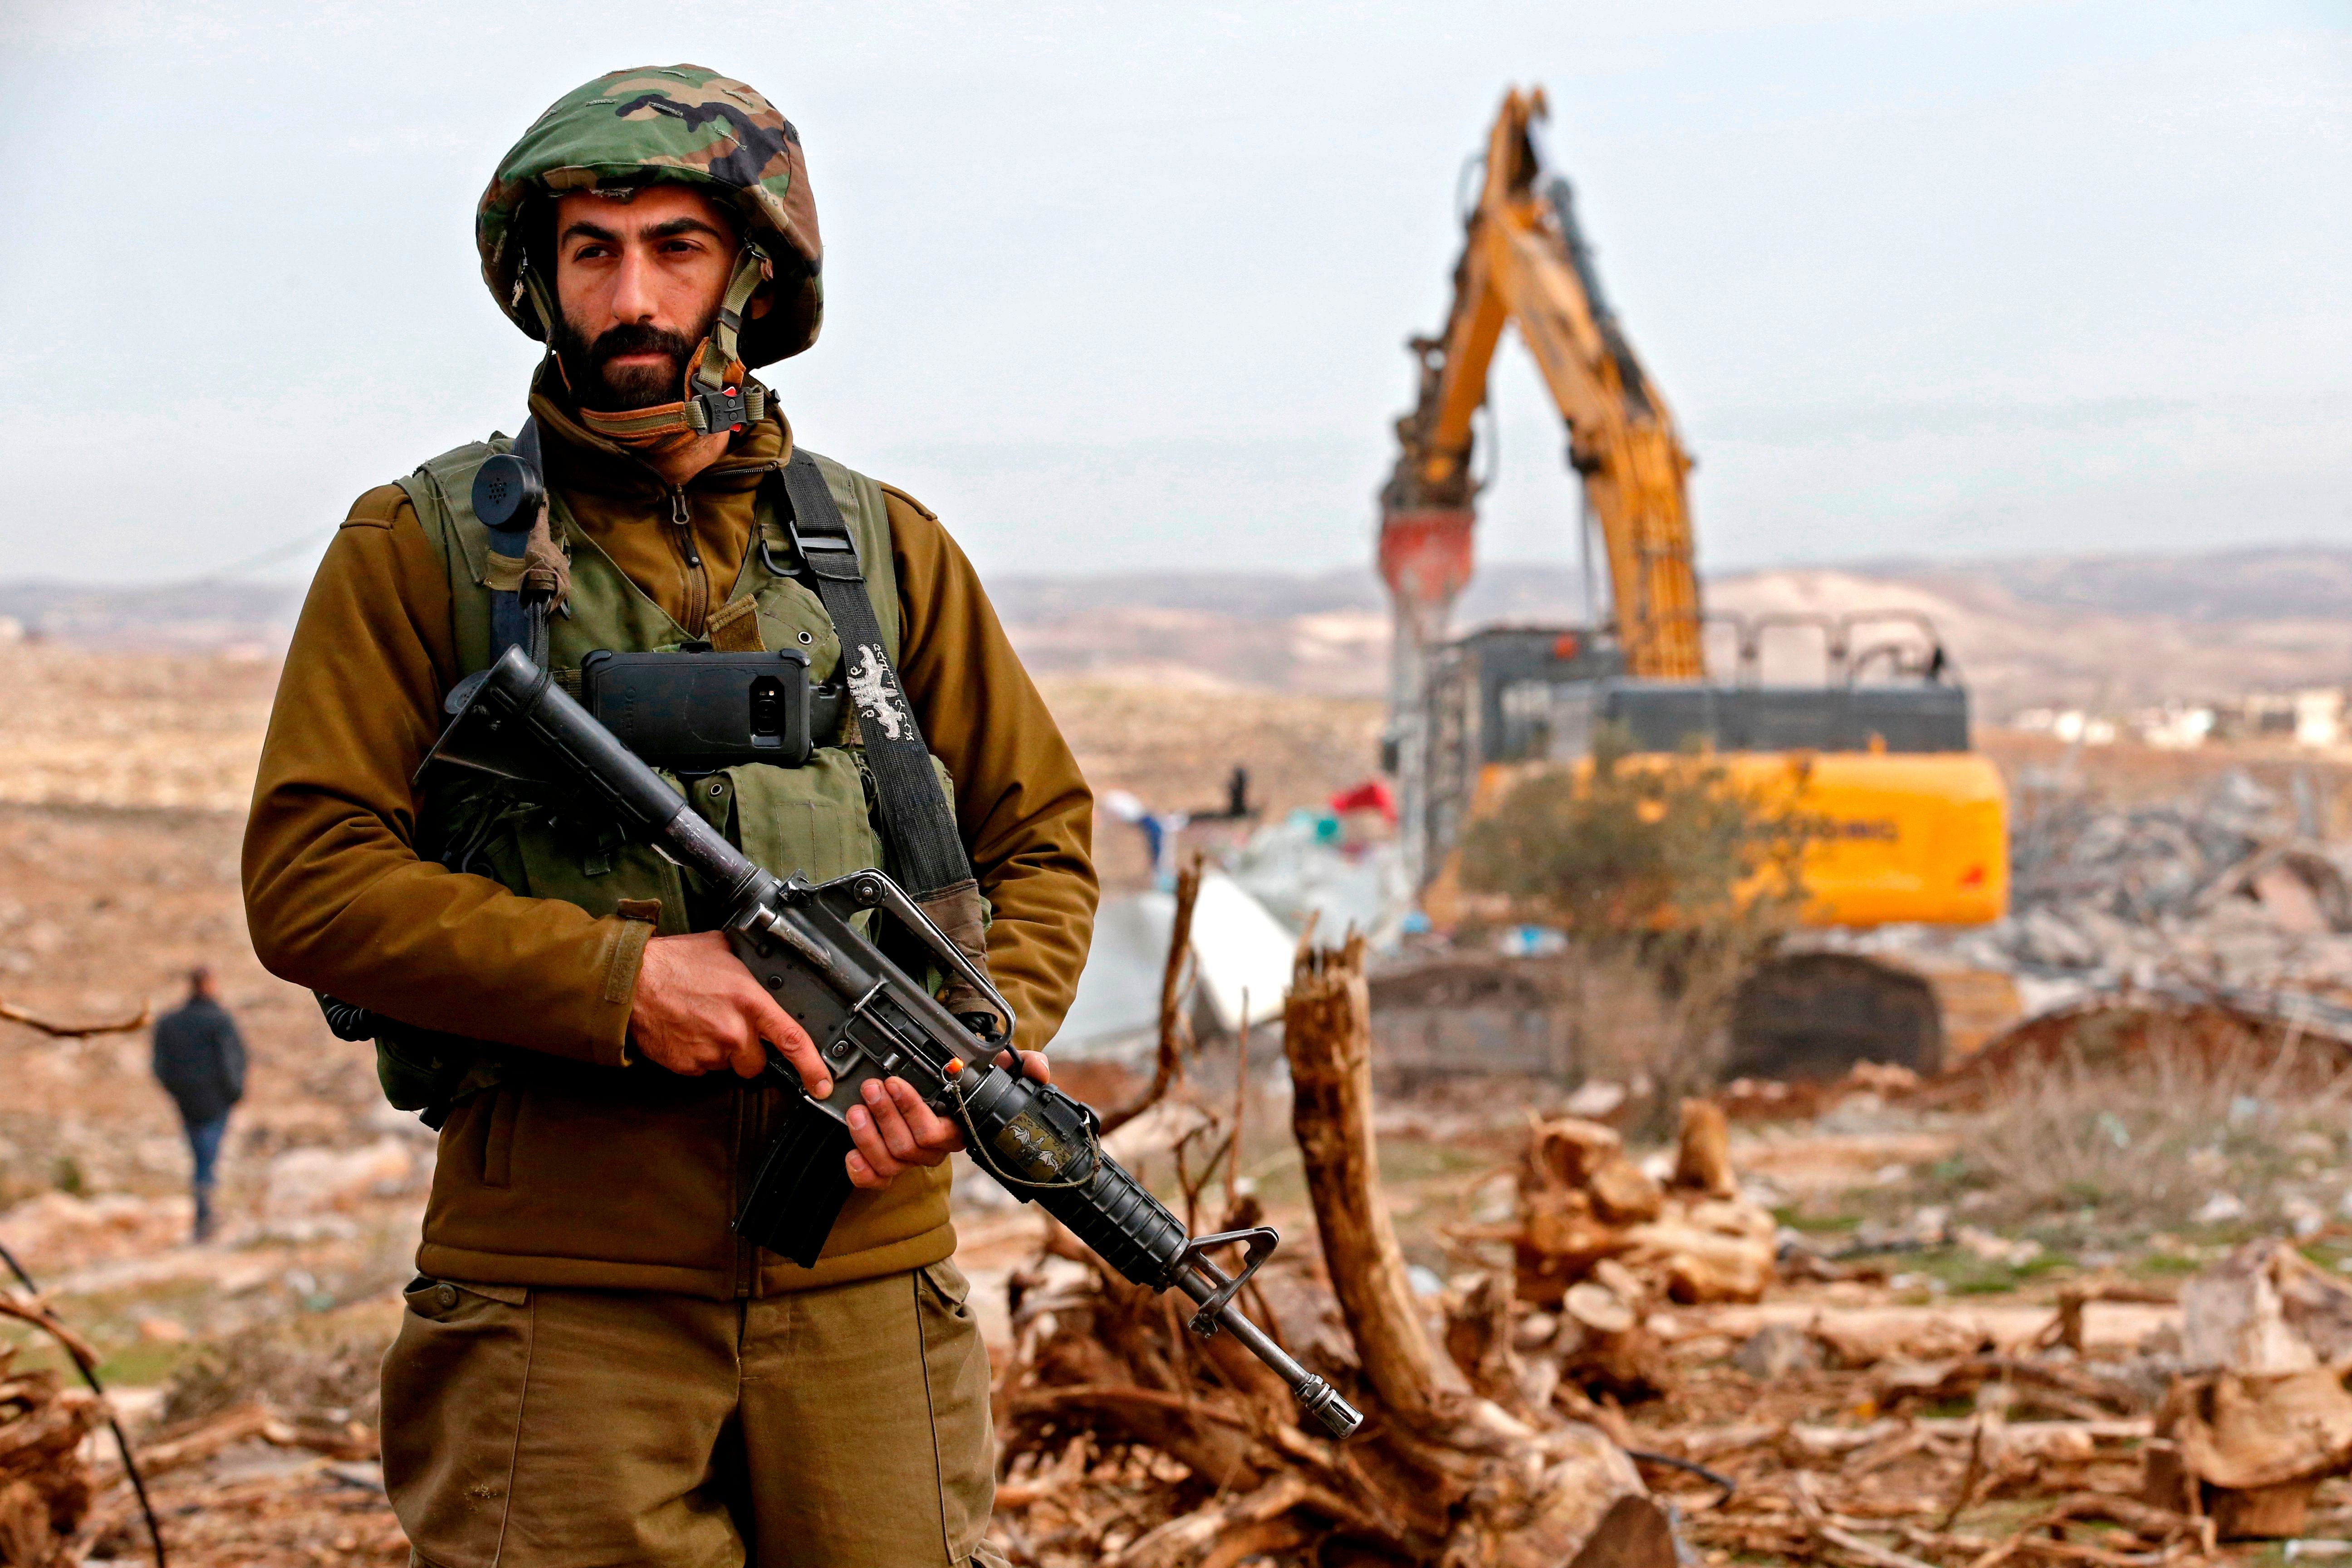 <p>A soldier stands guard as an excavator demolishes a Palestinian home which Israeli authorities said was build without a permit in the village of Al-Dirat near the West Bank</p>